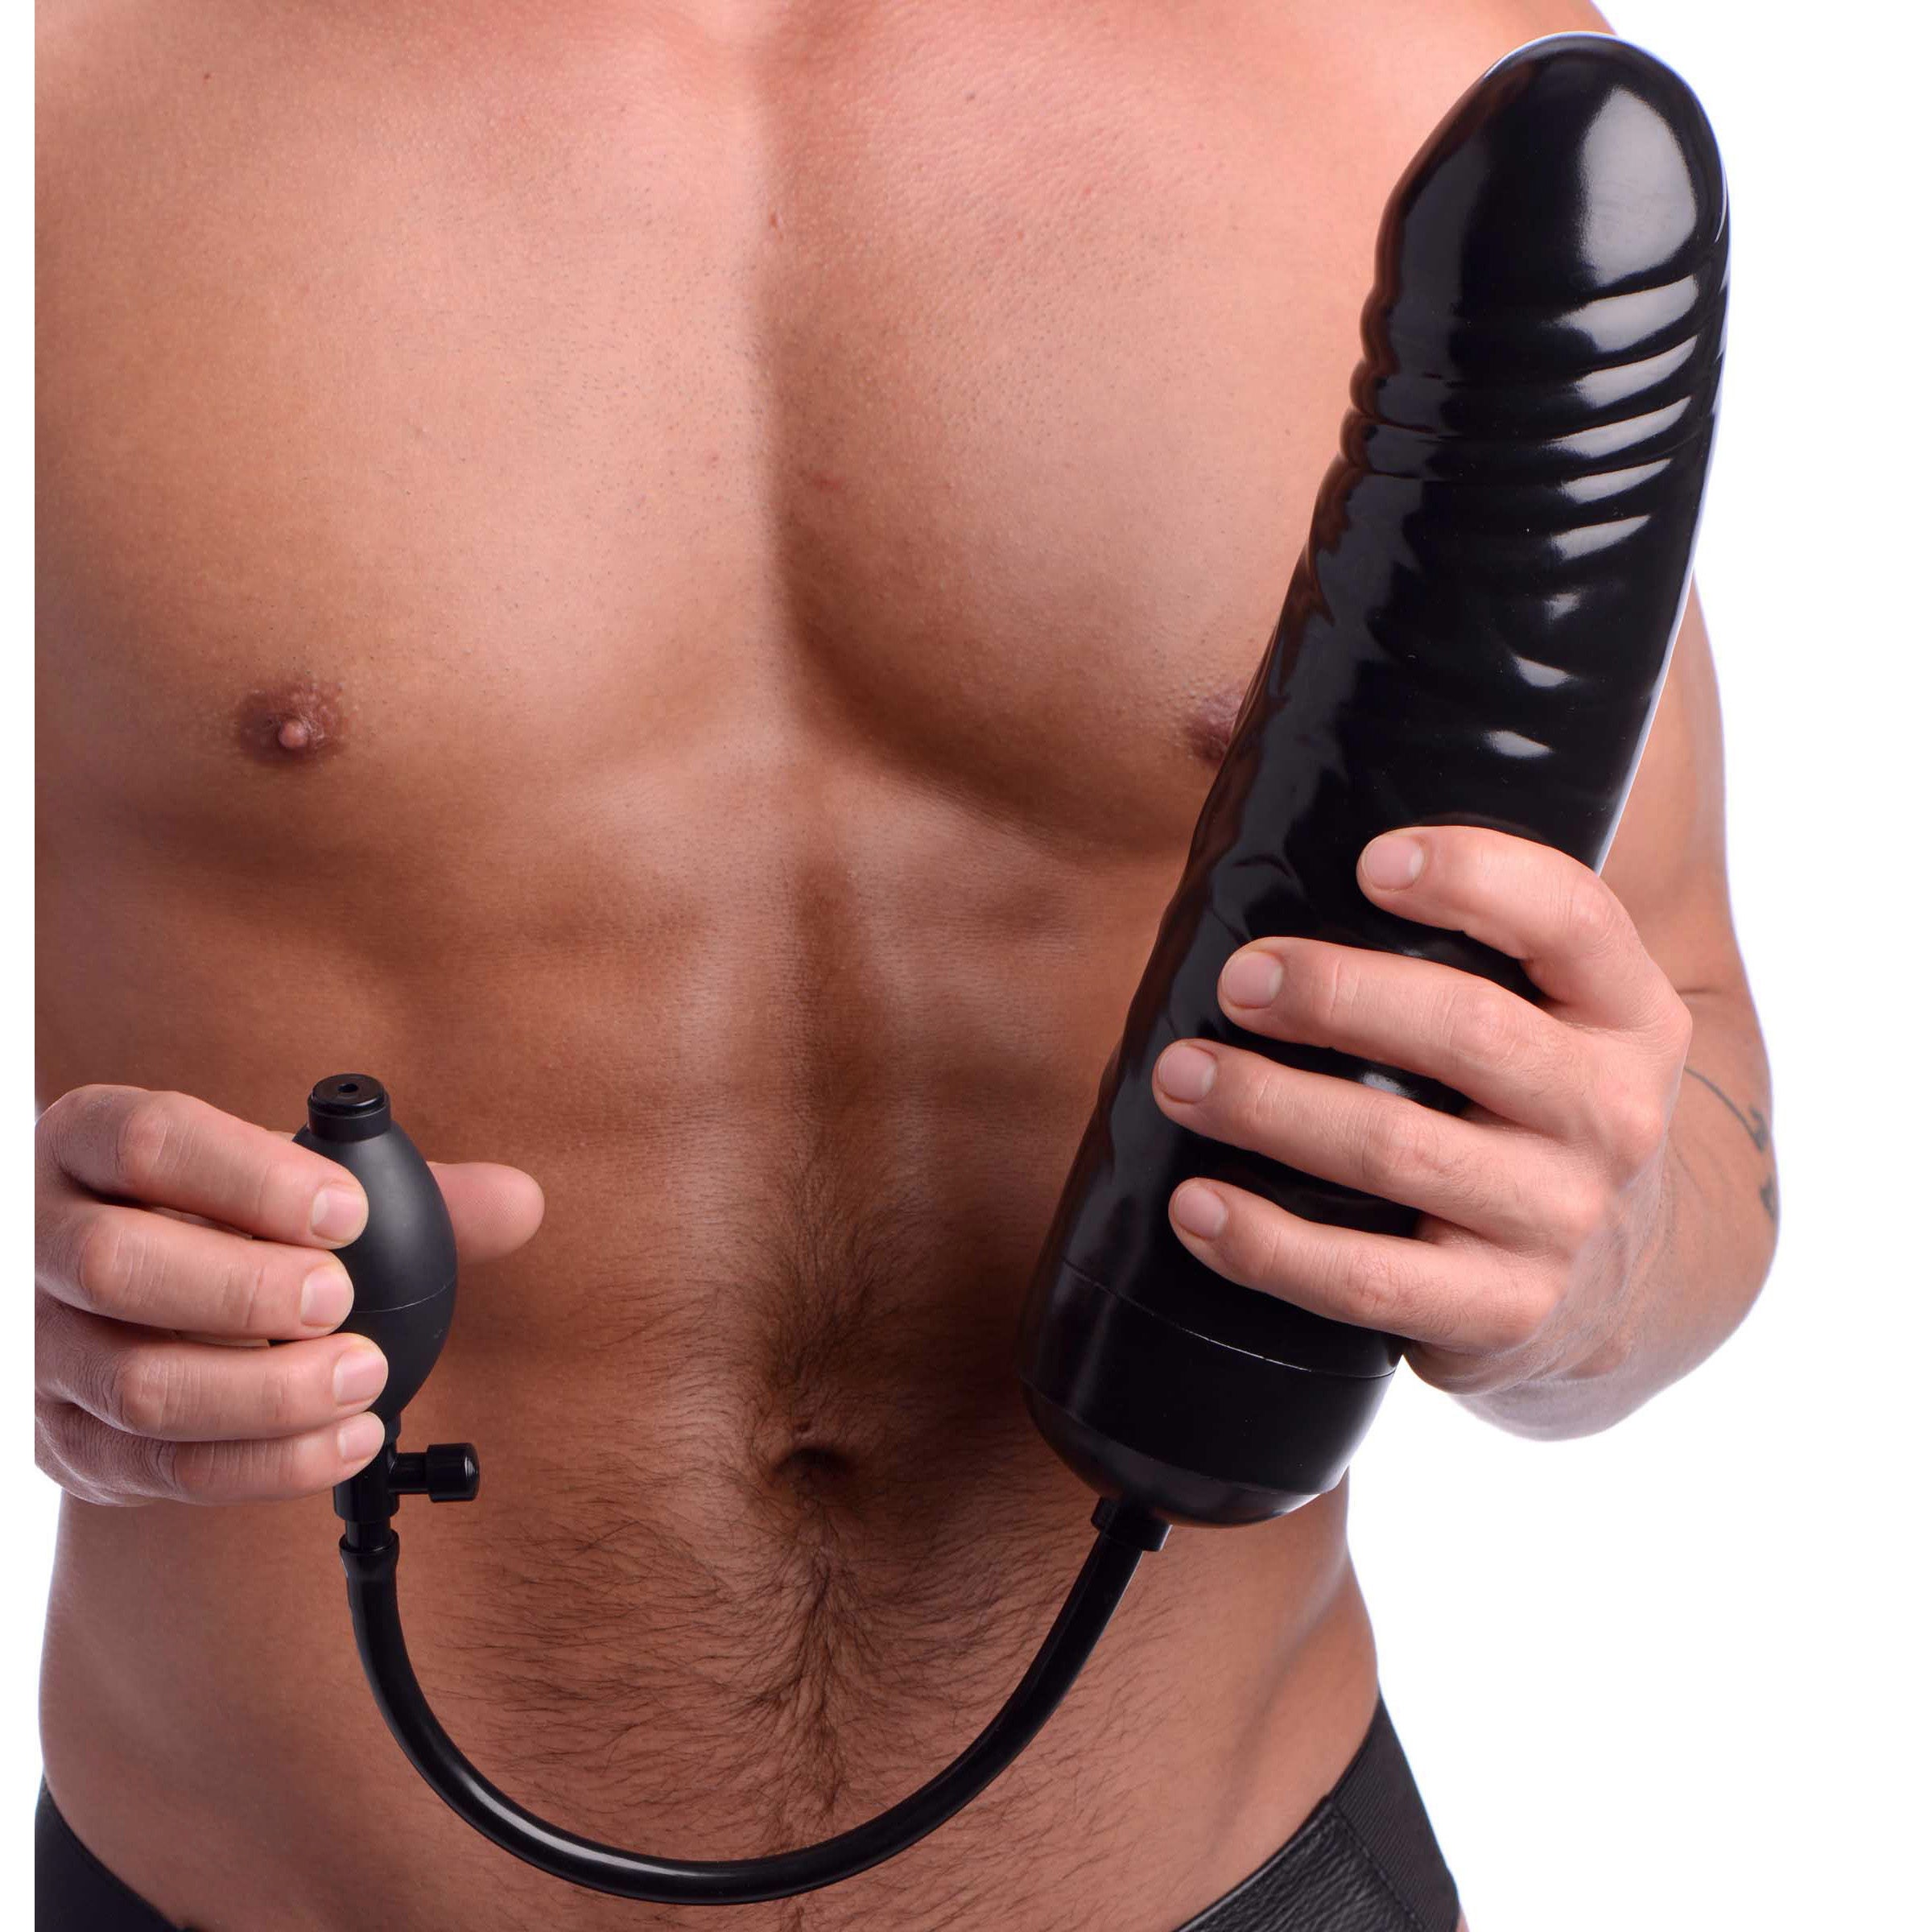 XXL Inflatable Dildo – Adult Sex Toys, Intimate Supplies, Sexual Wellness, Online Sex Store image